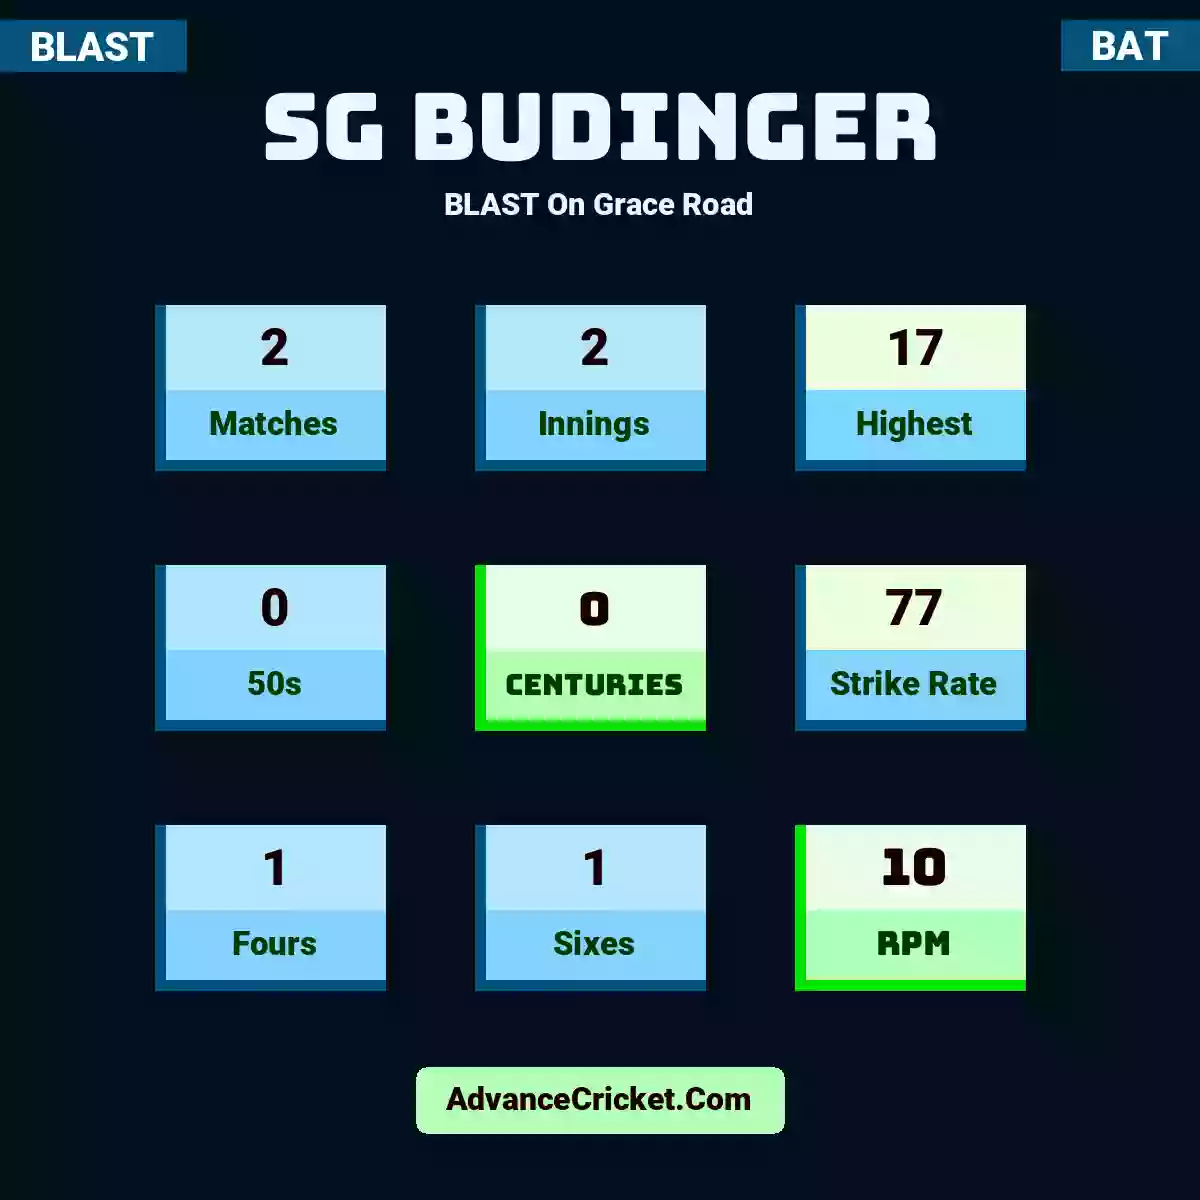 SG Budinger BLAST  On Grace Road, SG Budinger played 2 matches, scored 17 runs as highest, 0 half-centuries, and 0 centuries, with a strike rate of 77. S.Budinger hit 1 fours and 1 sixes, with an RPM of 10.